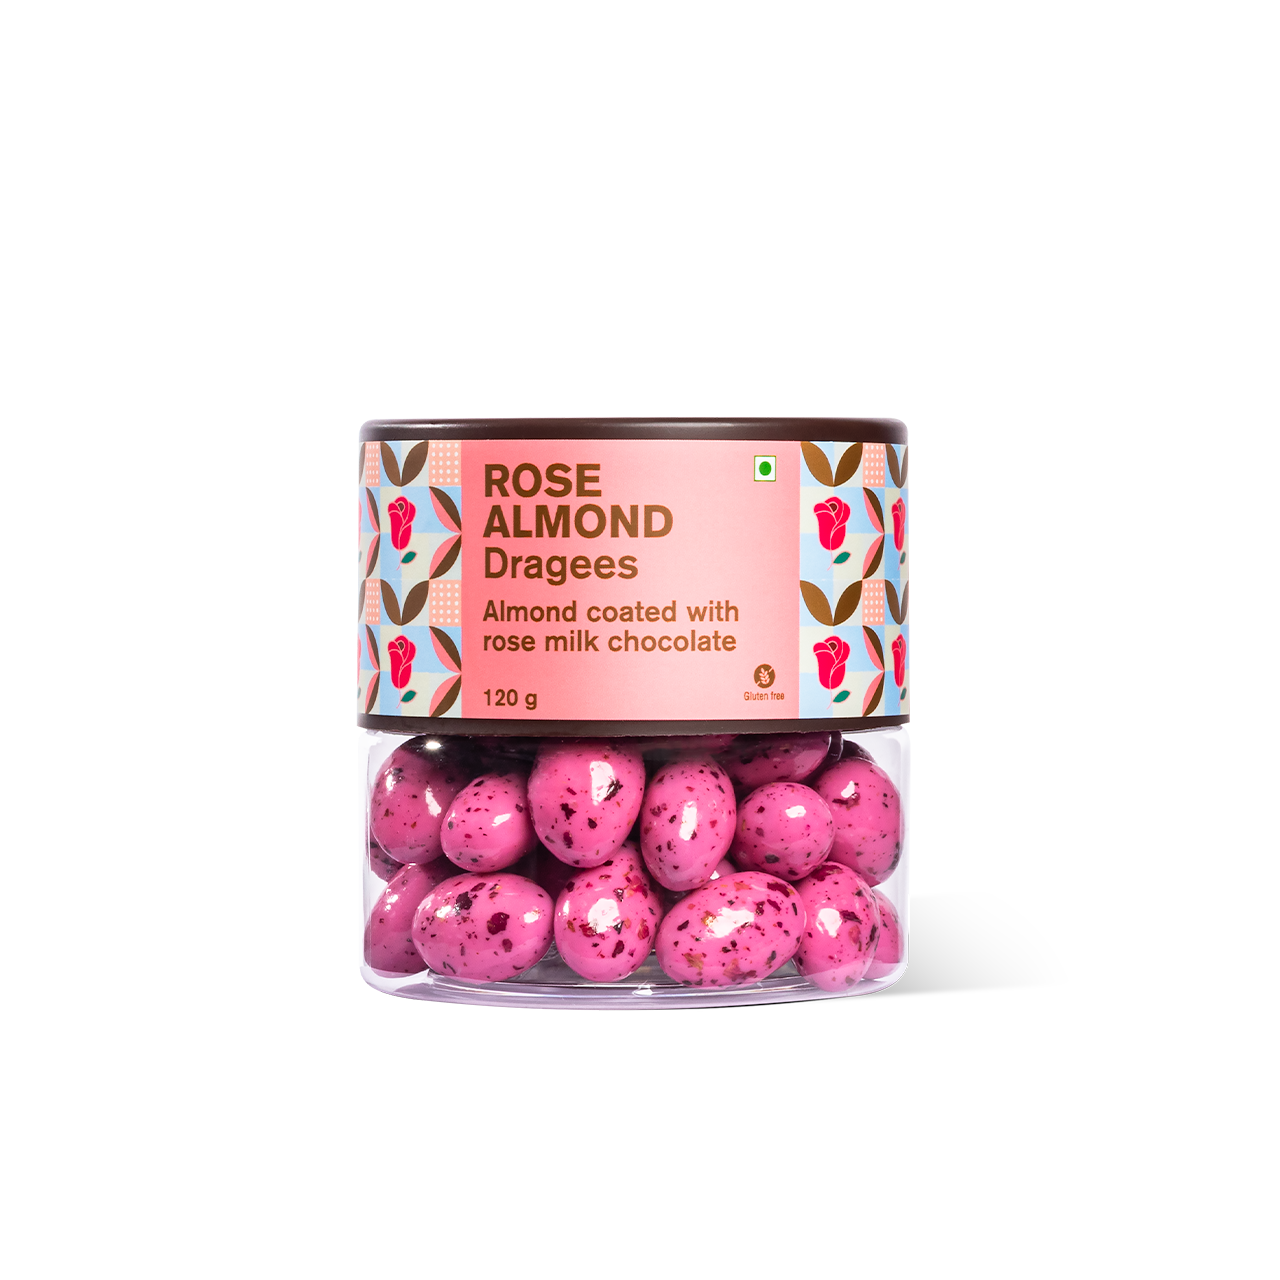 Entisi - Chocolate coated Rose Almonds Dragees Jar